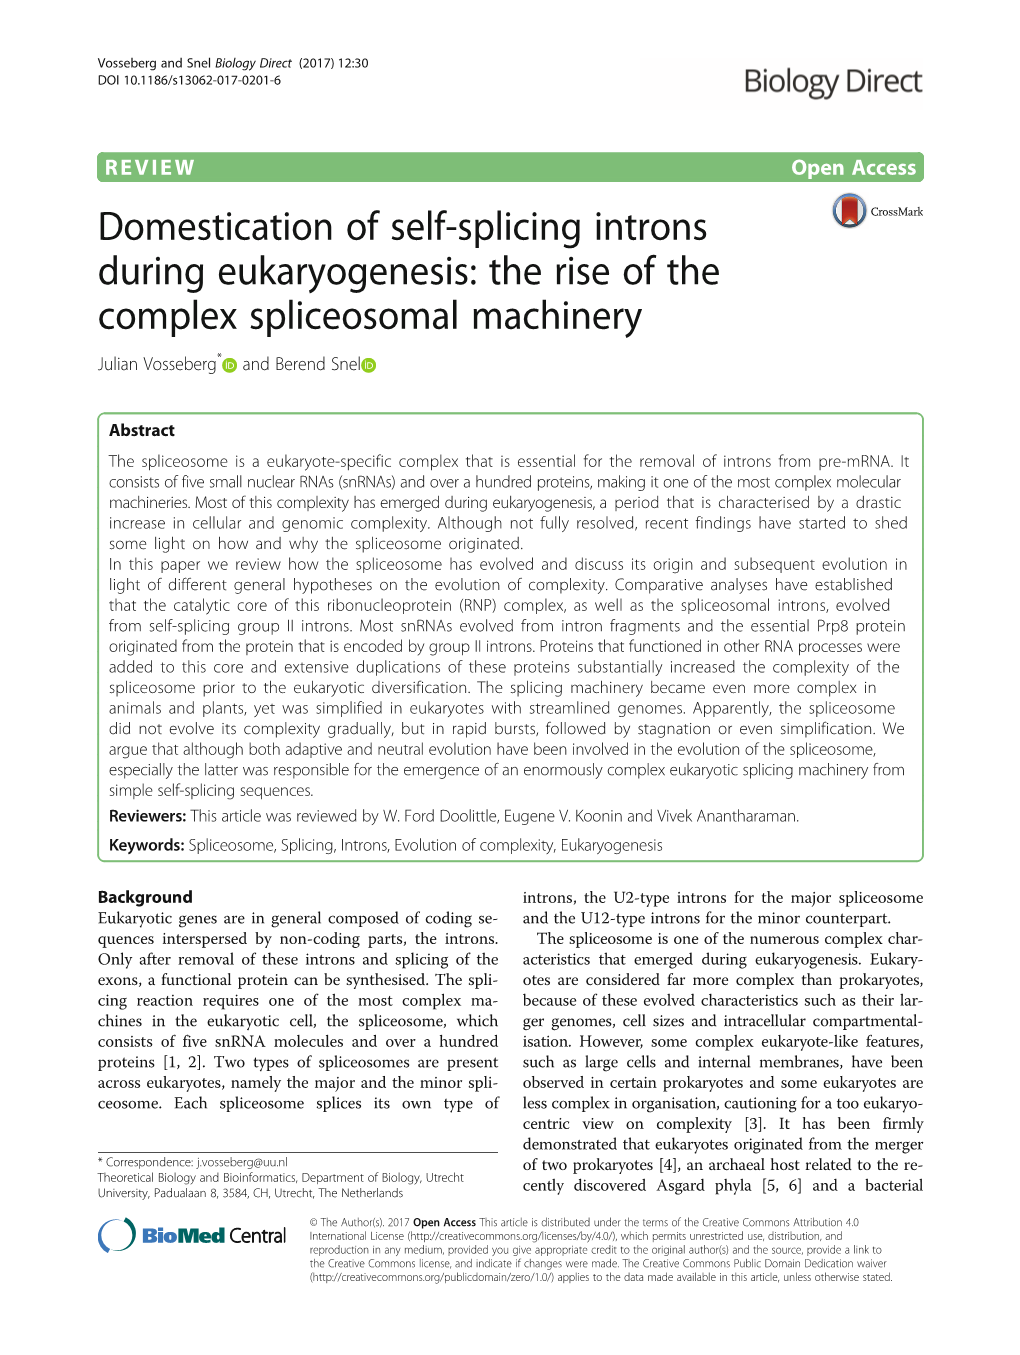 Domestication of Self-Splicing Introns During Eukaryogenesis: the Rise of the Complex Spliceosomal Machinery Julian Vosseberg* and Berend Snel